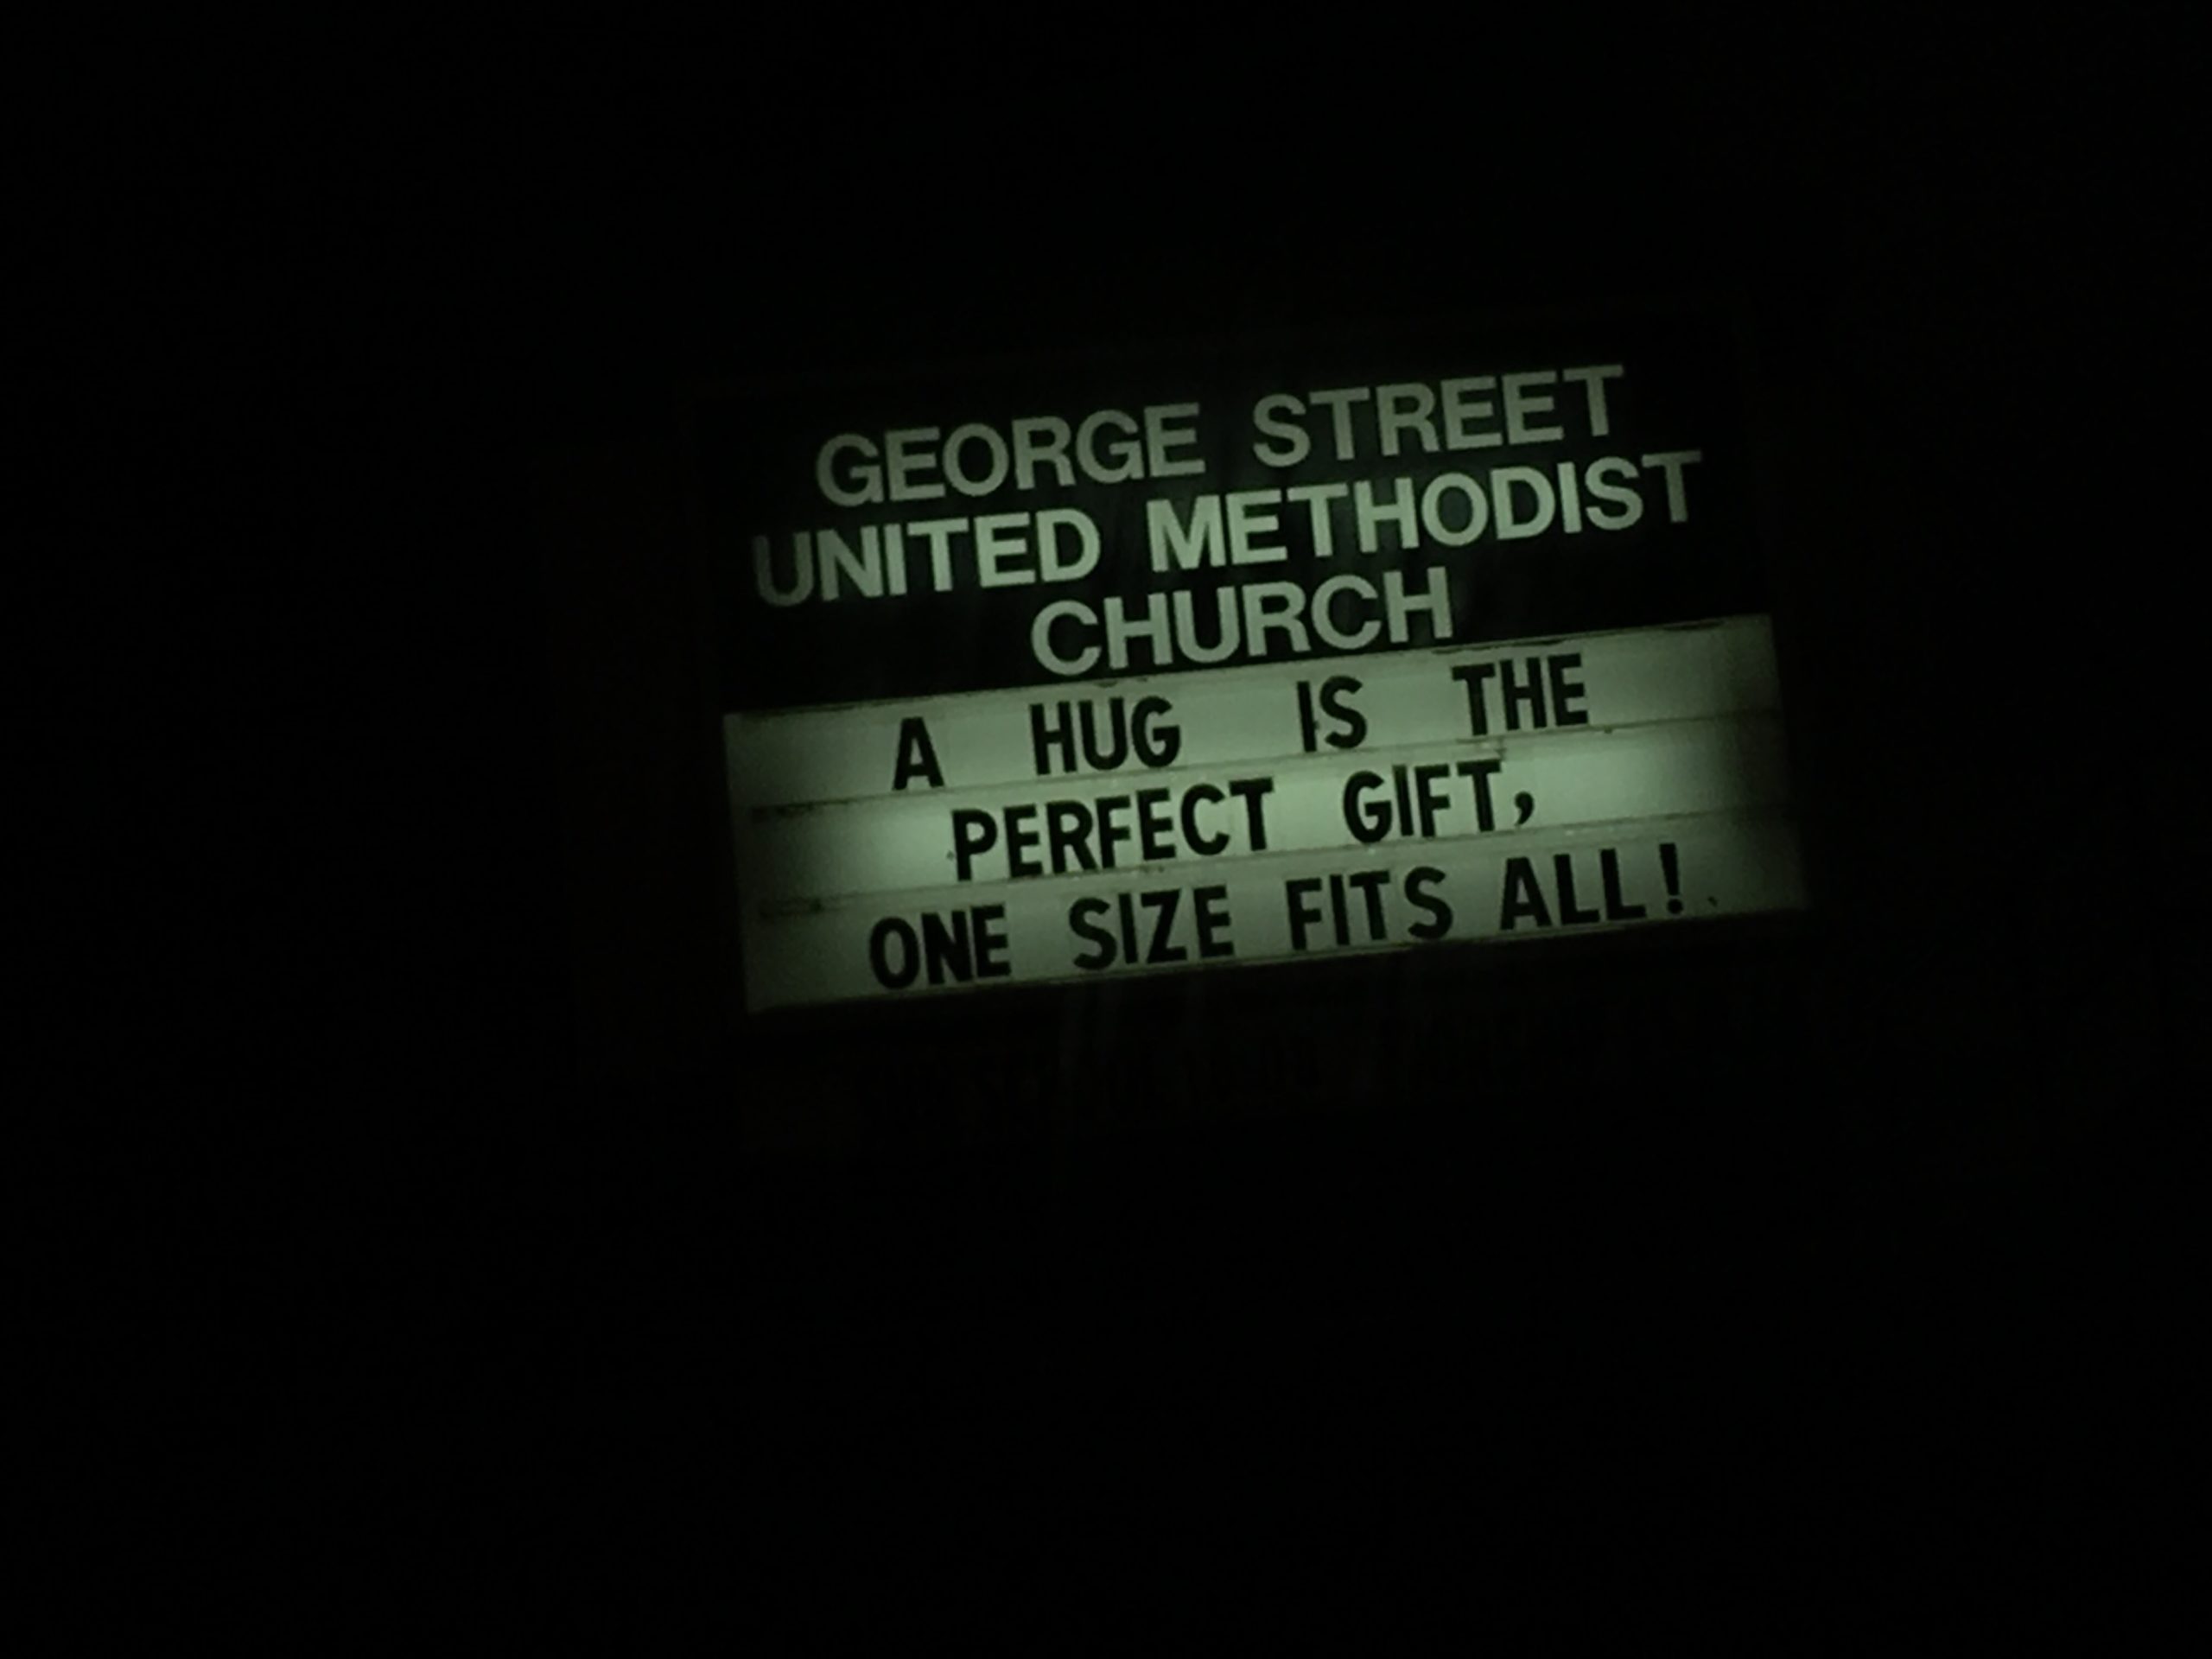 A Hug Church Sign - This church sign talks about a hug being a perfect gift. Which makes this George Street United Methodist Church this weeks Church Sign Saturday. A Hug is the prefect gift, one size fits all!